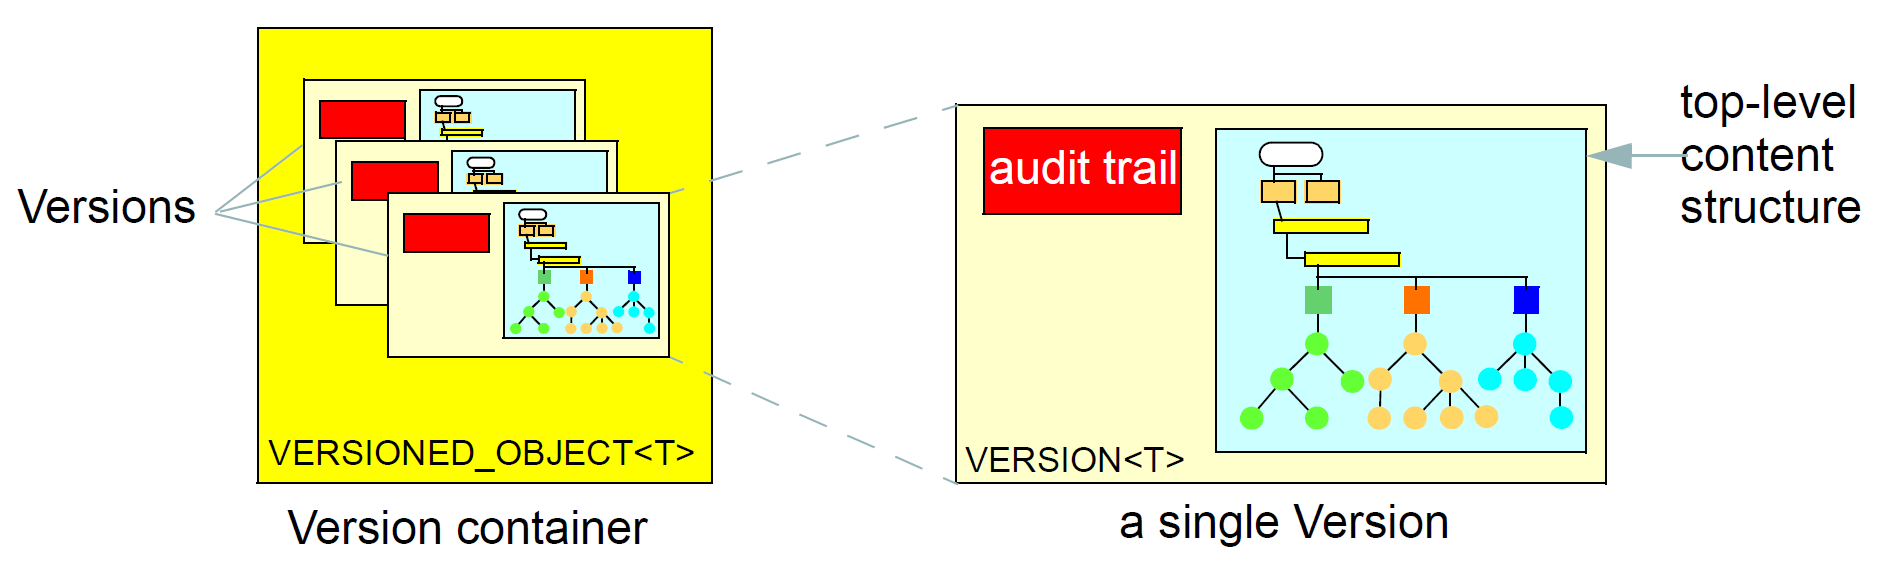 version control structures